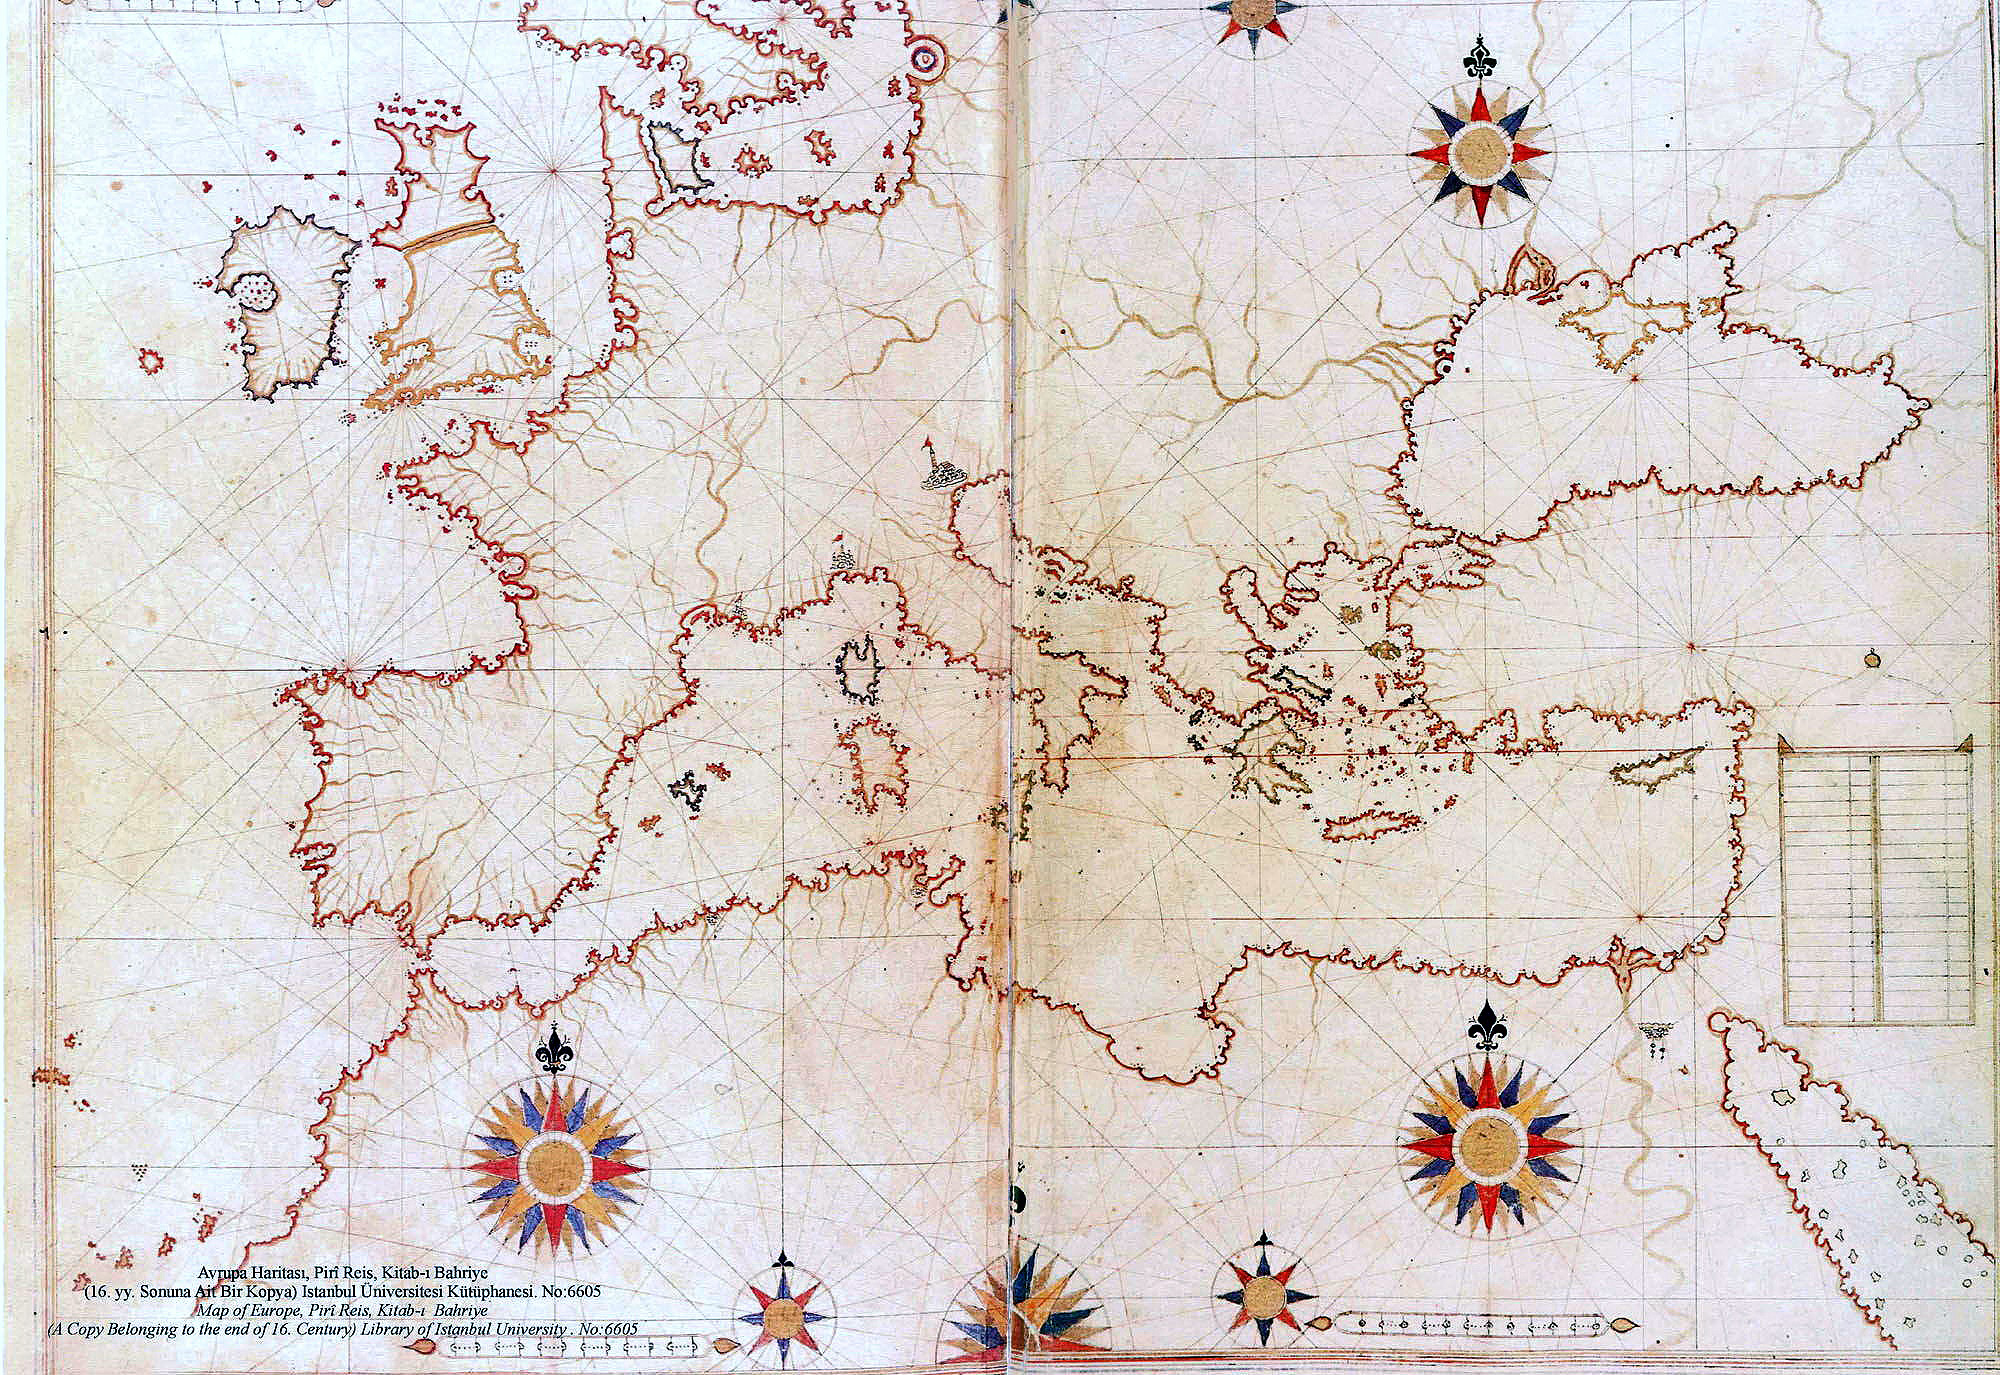 Stories - Piri Reis' Map: A Map to Intrigue East and West Alike